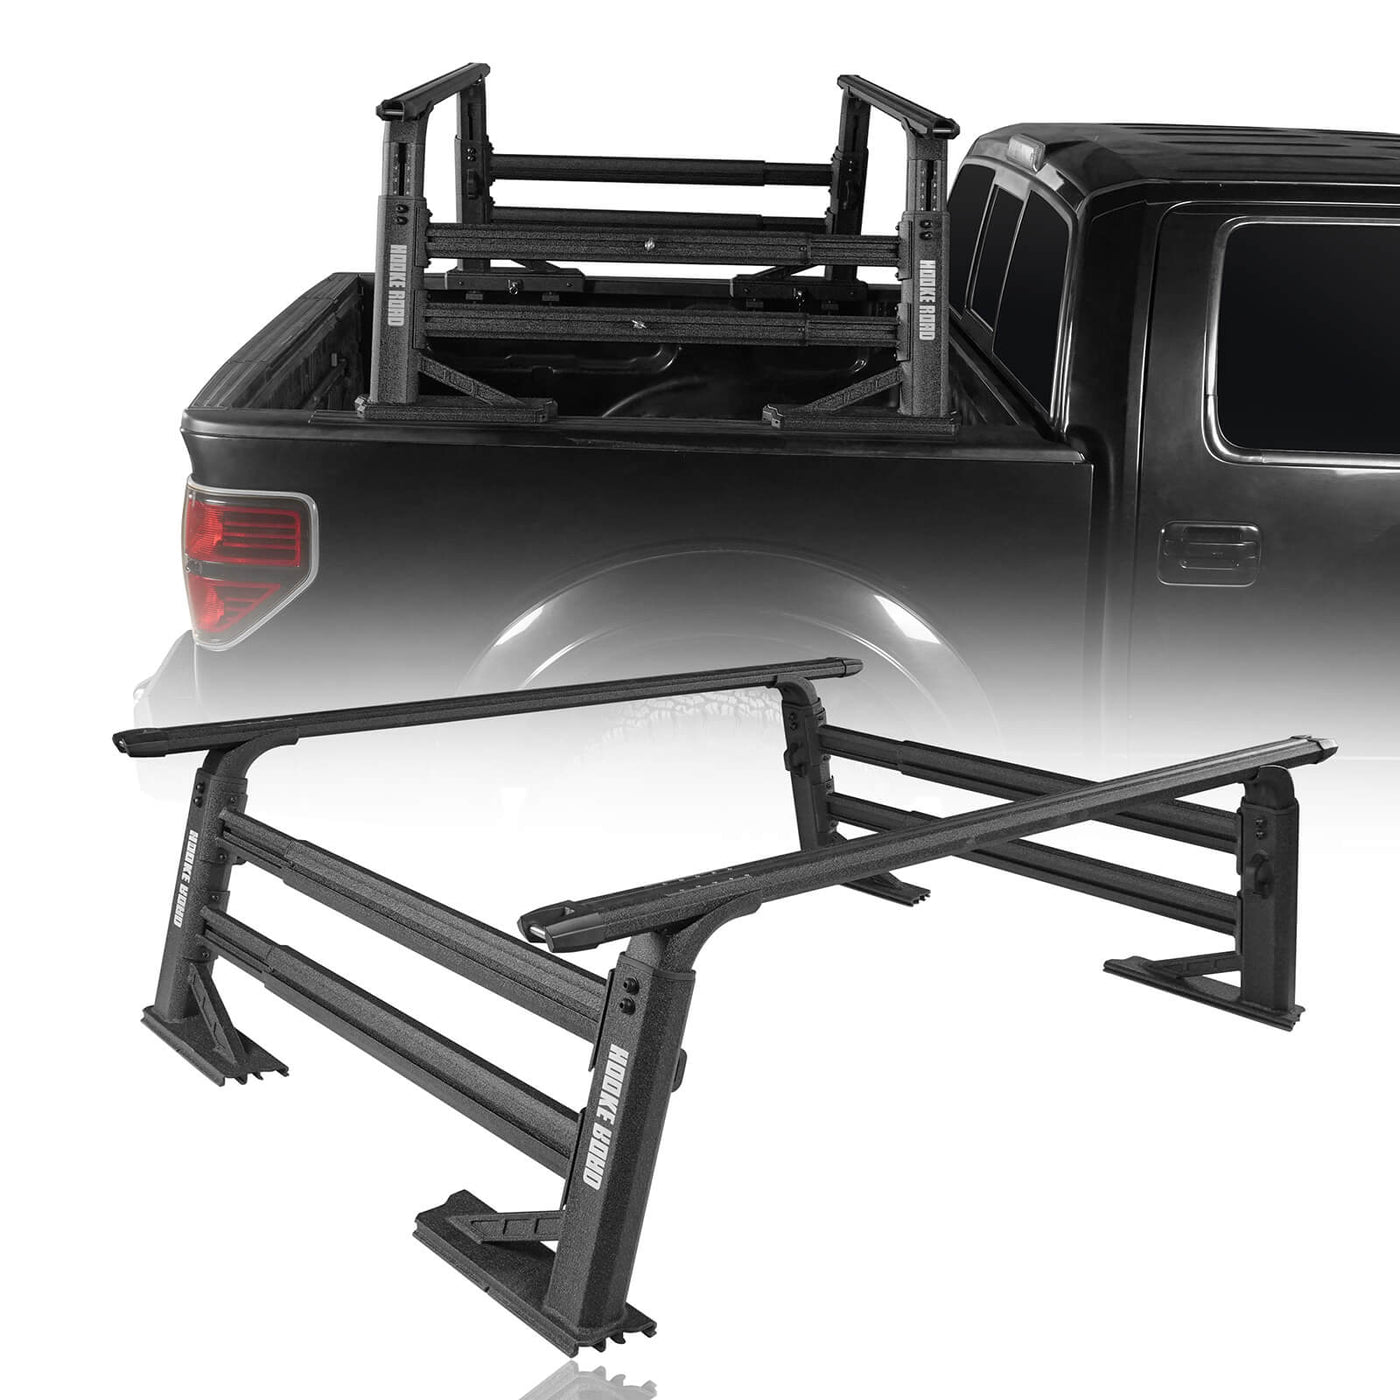 Truck Bed Cargo Rack Truck Ladder Rack for Toyota And Nissan Trucks w ...